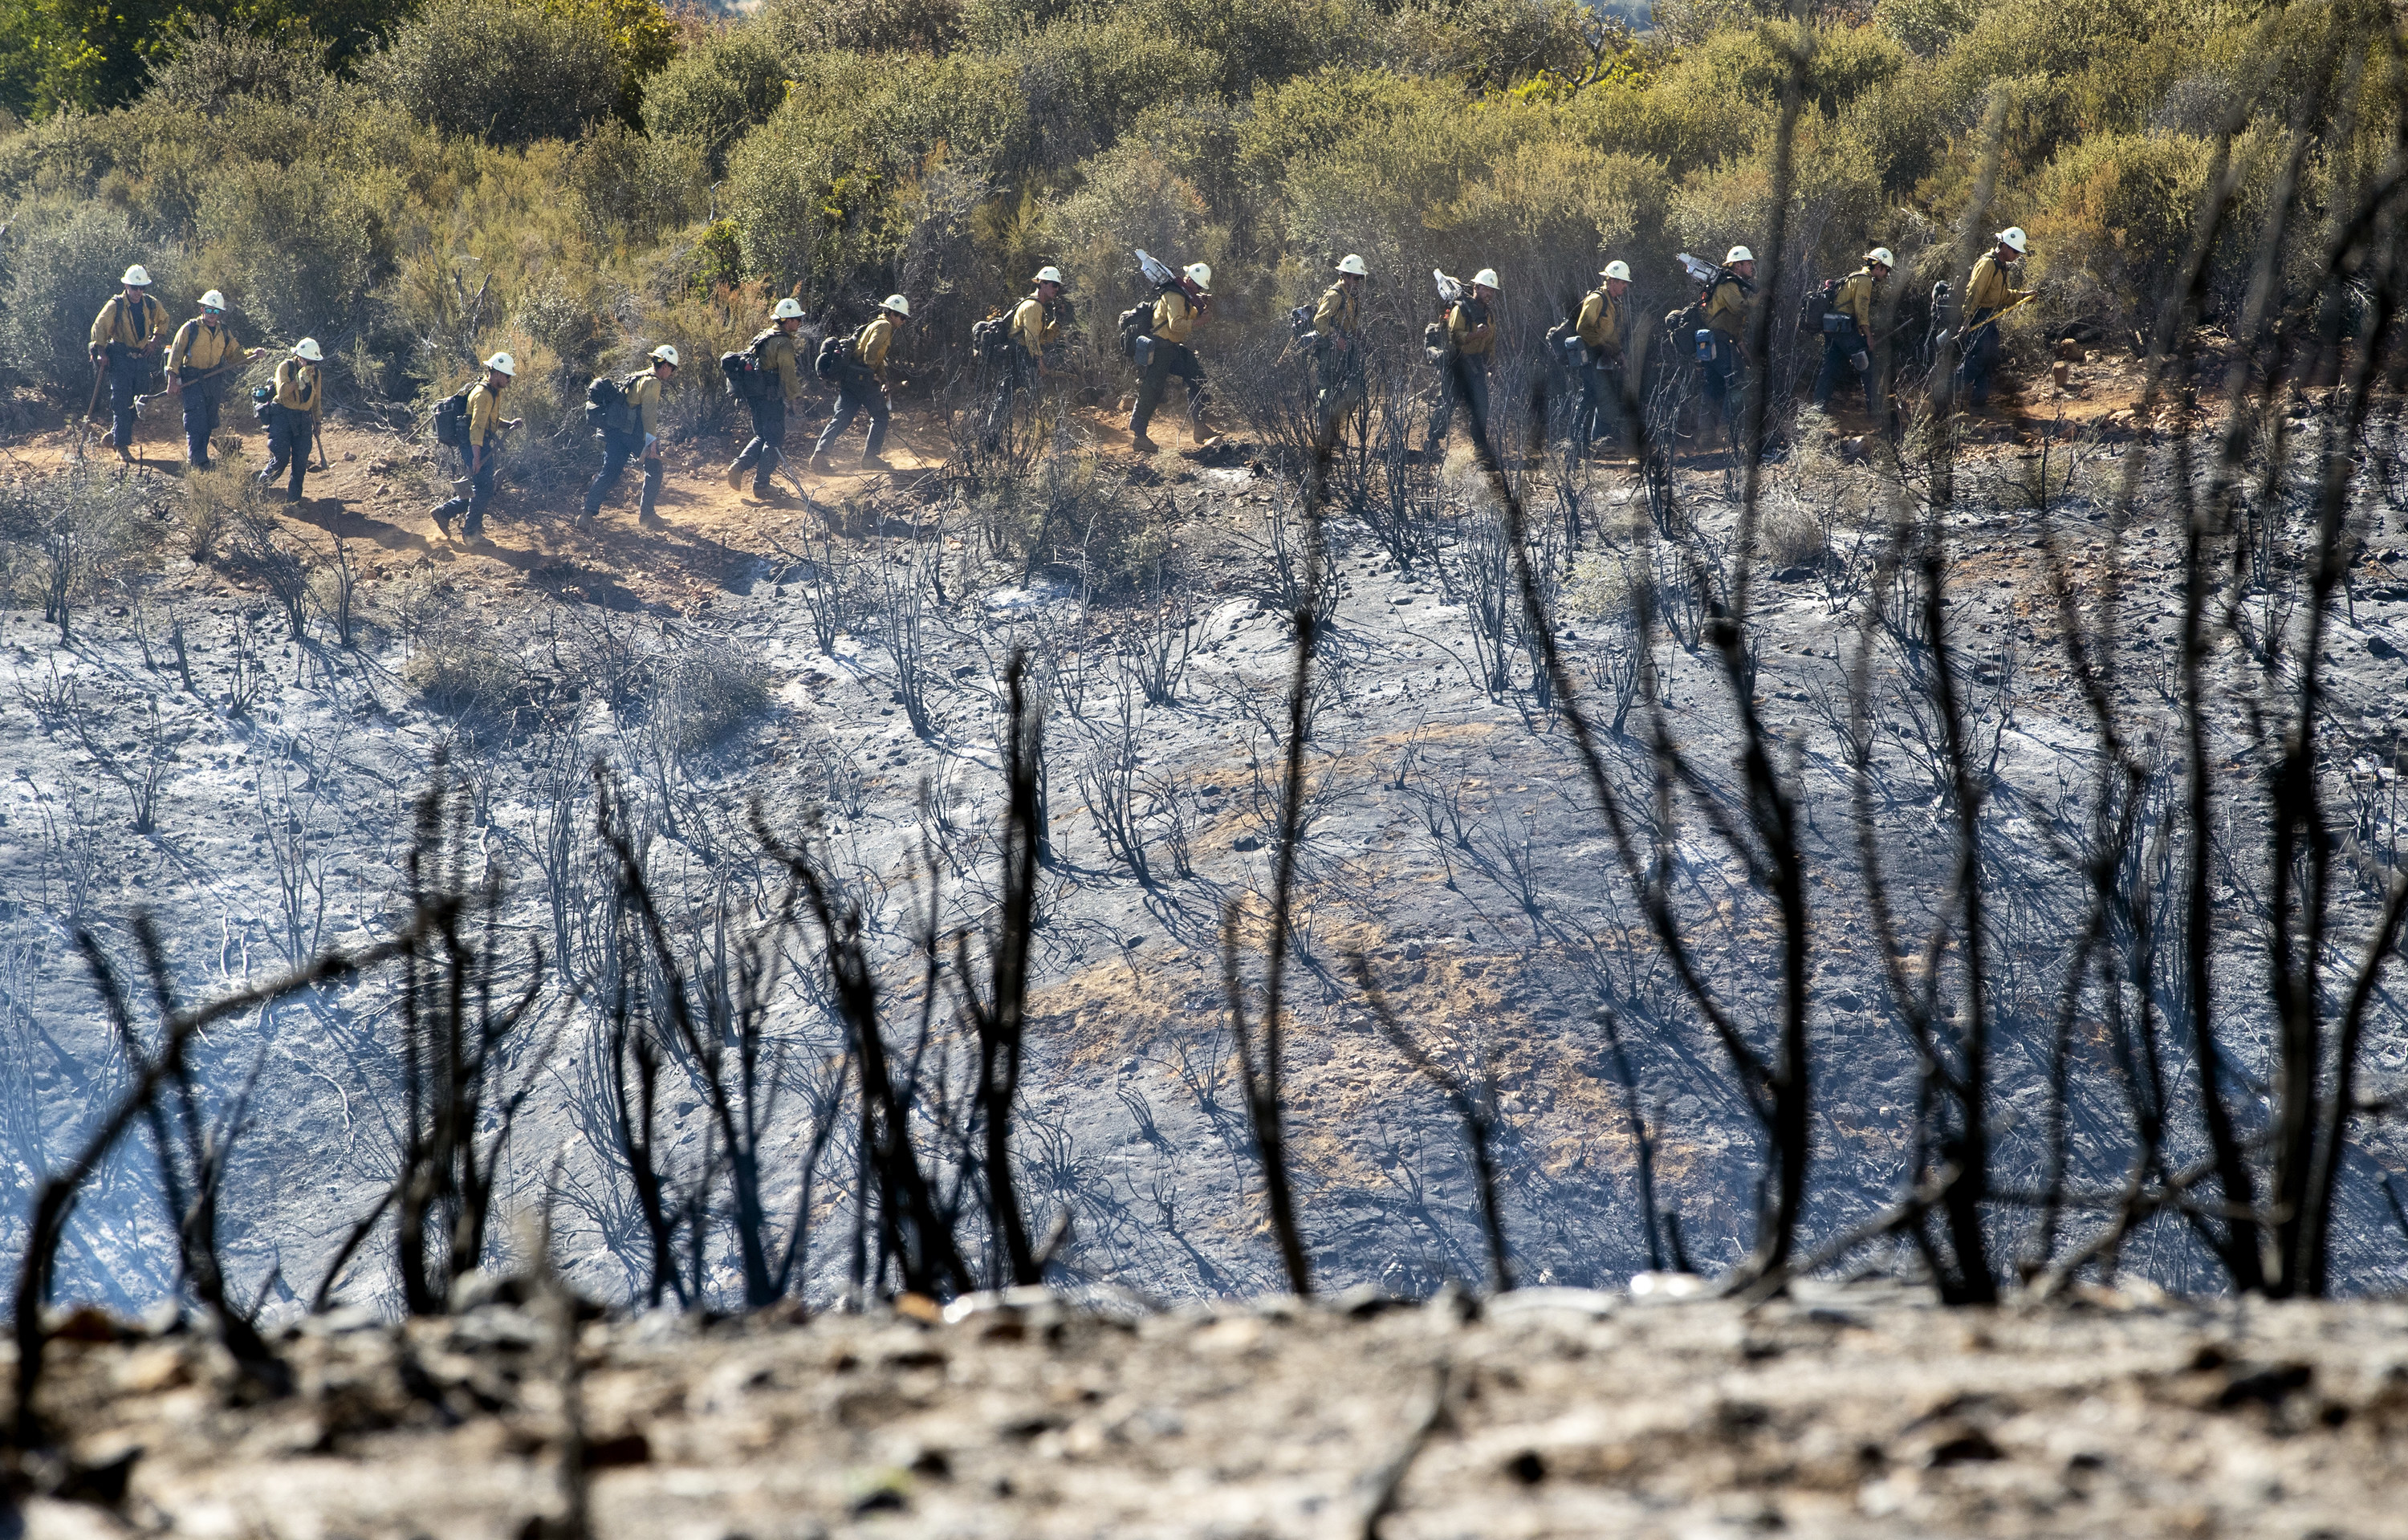 Firefighters in the distance walk in a line outside by a charred field with burnt foliage in the foreground